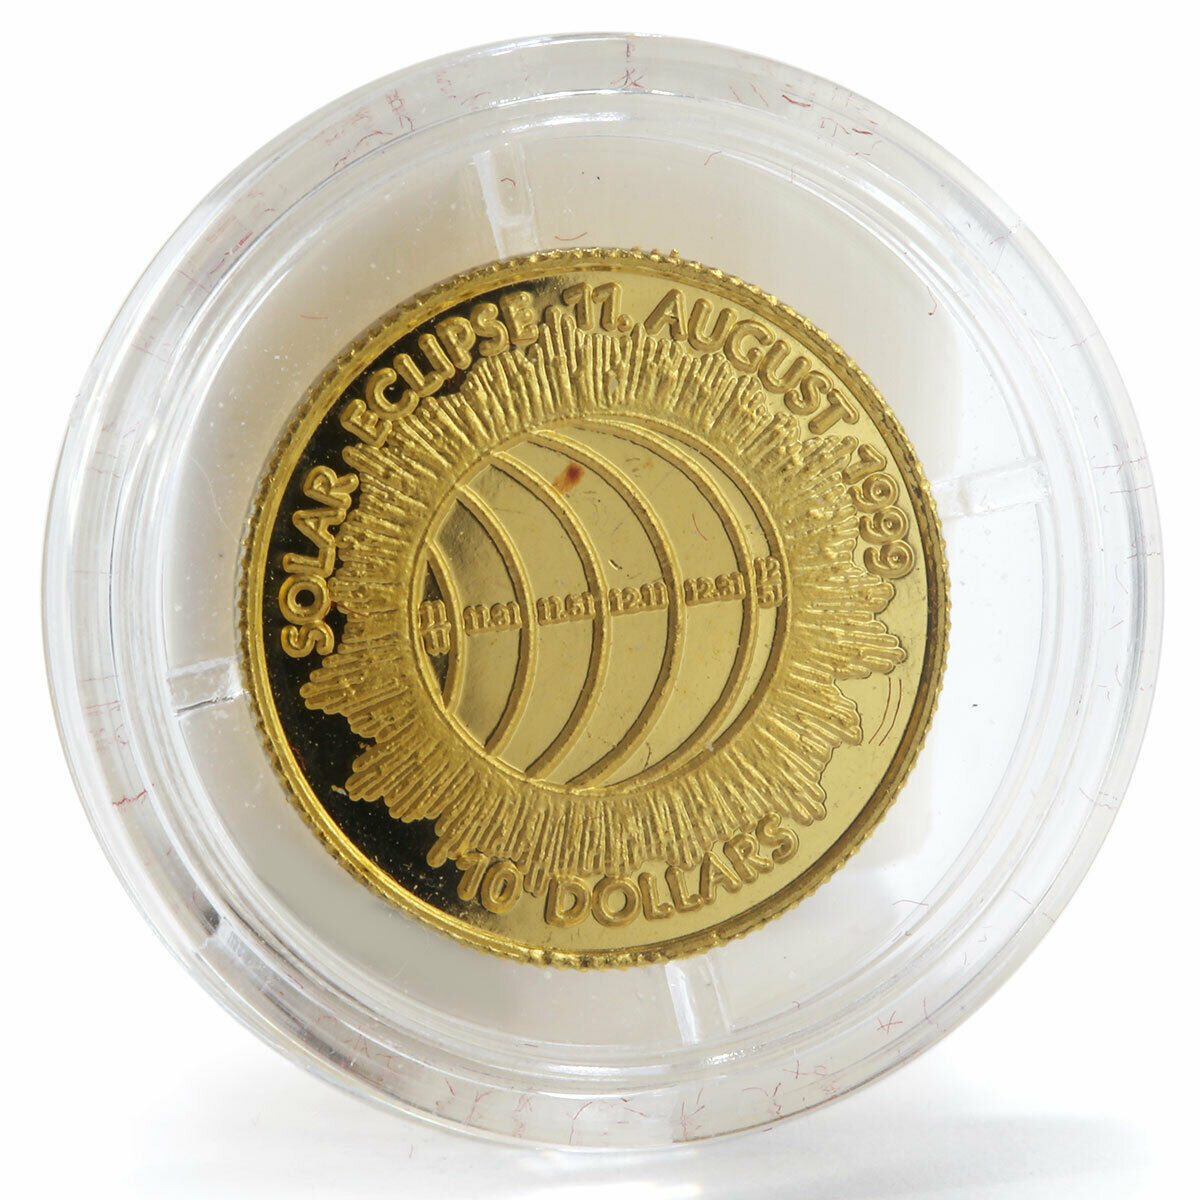 Cook Islands 10 dollars Solar Eclipse proof gold coin 1999